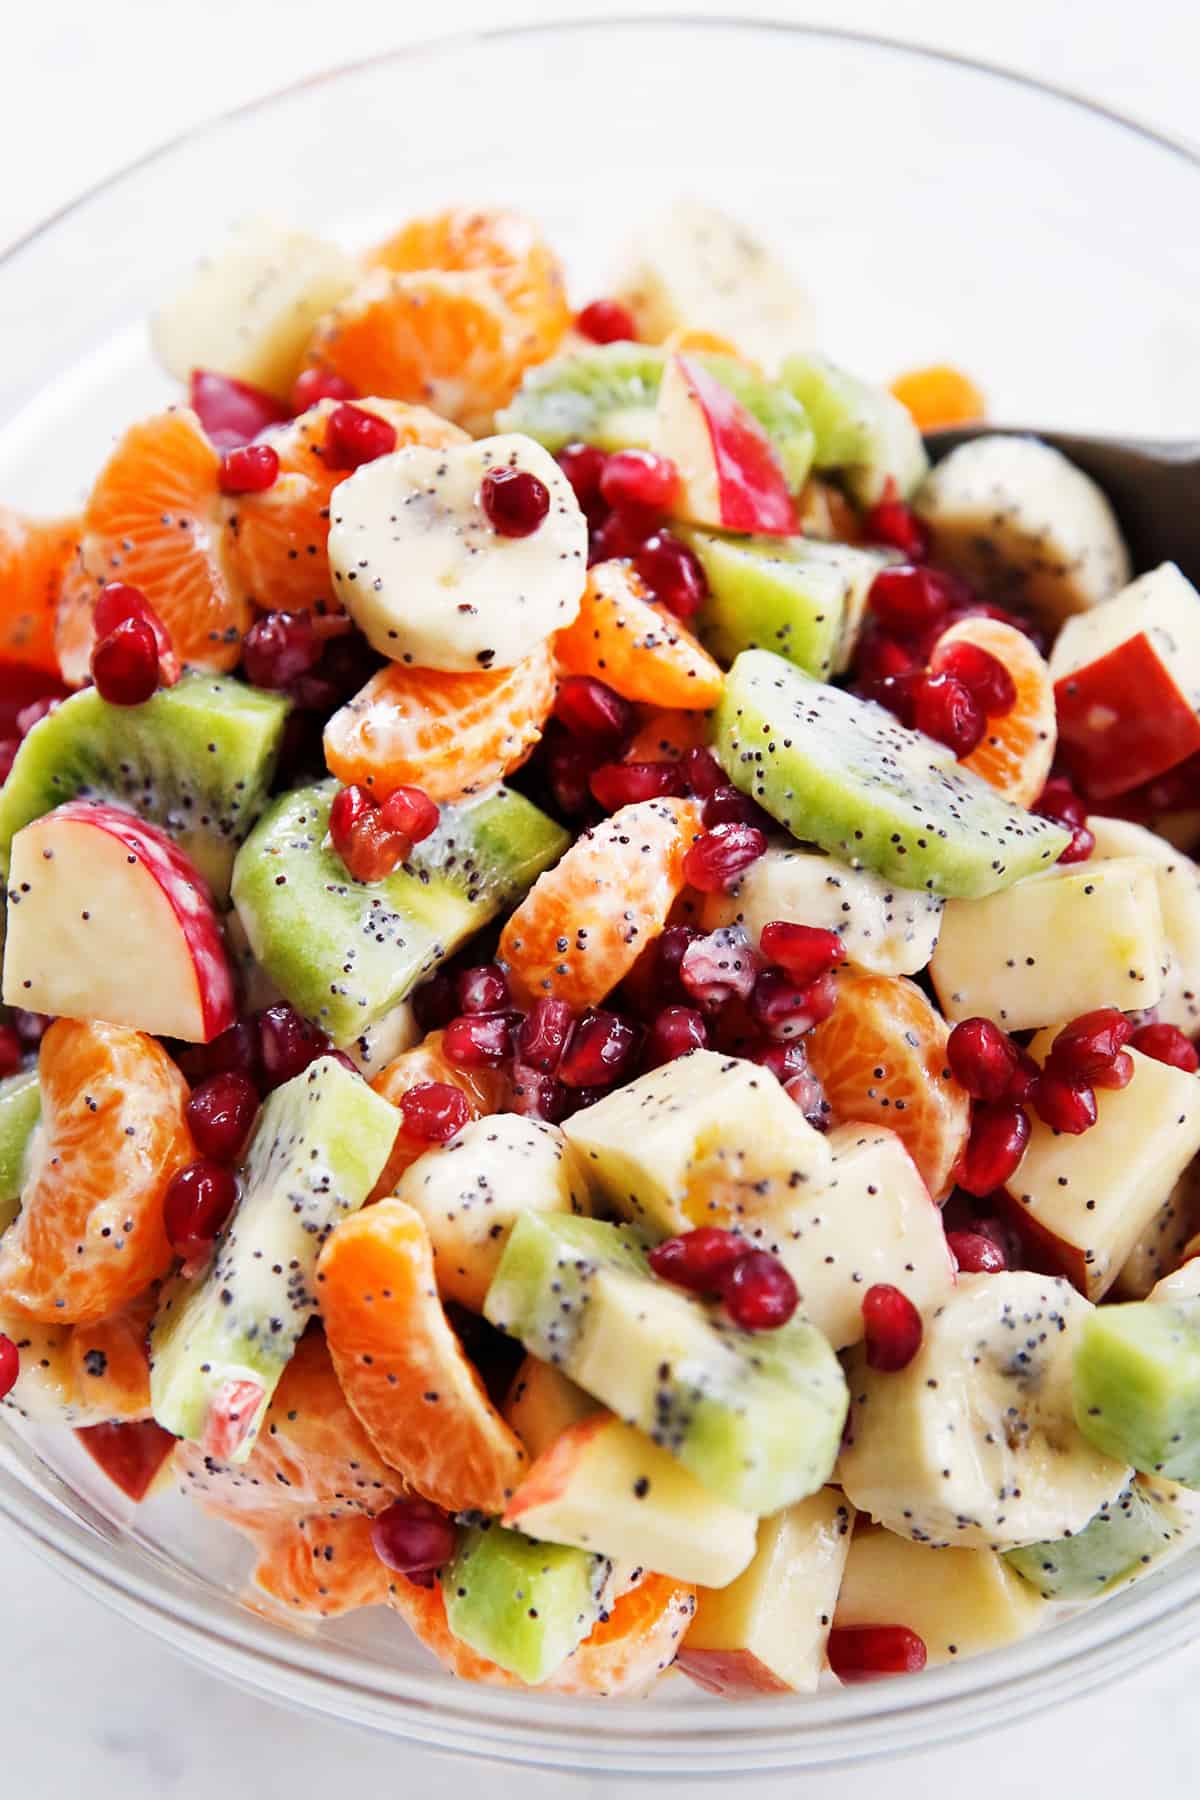 A bowl of winter fruit salad with winter fruit and greek yogurt dressing.